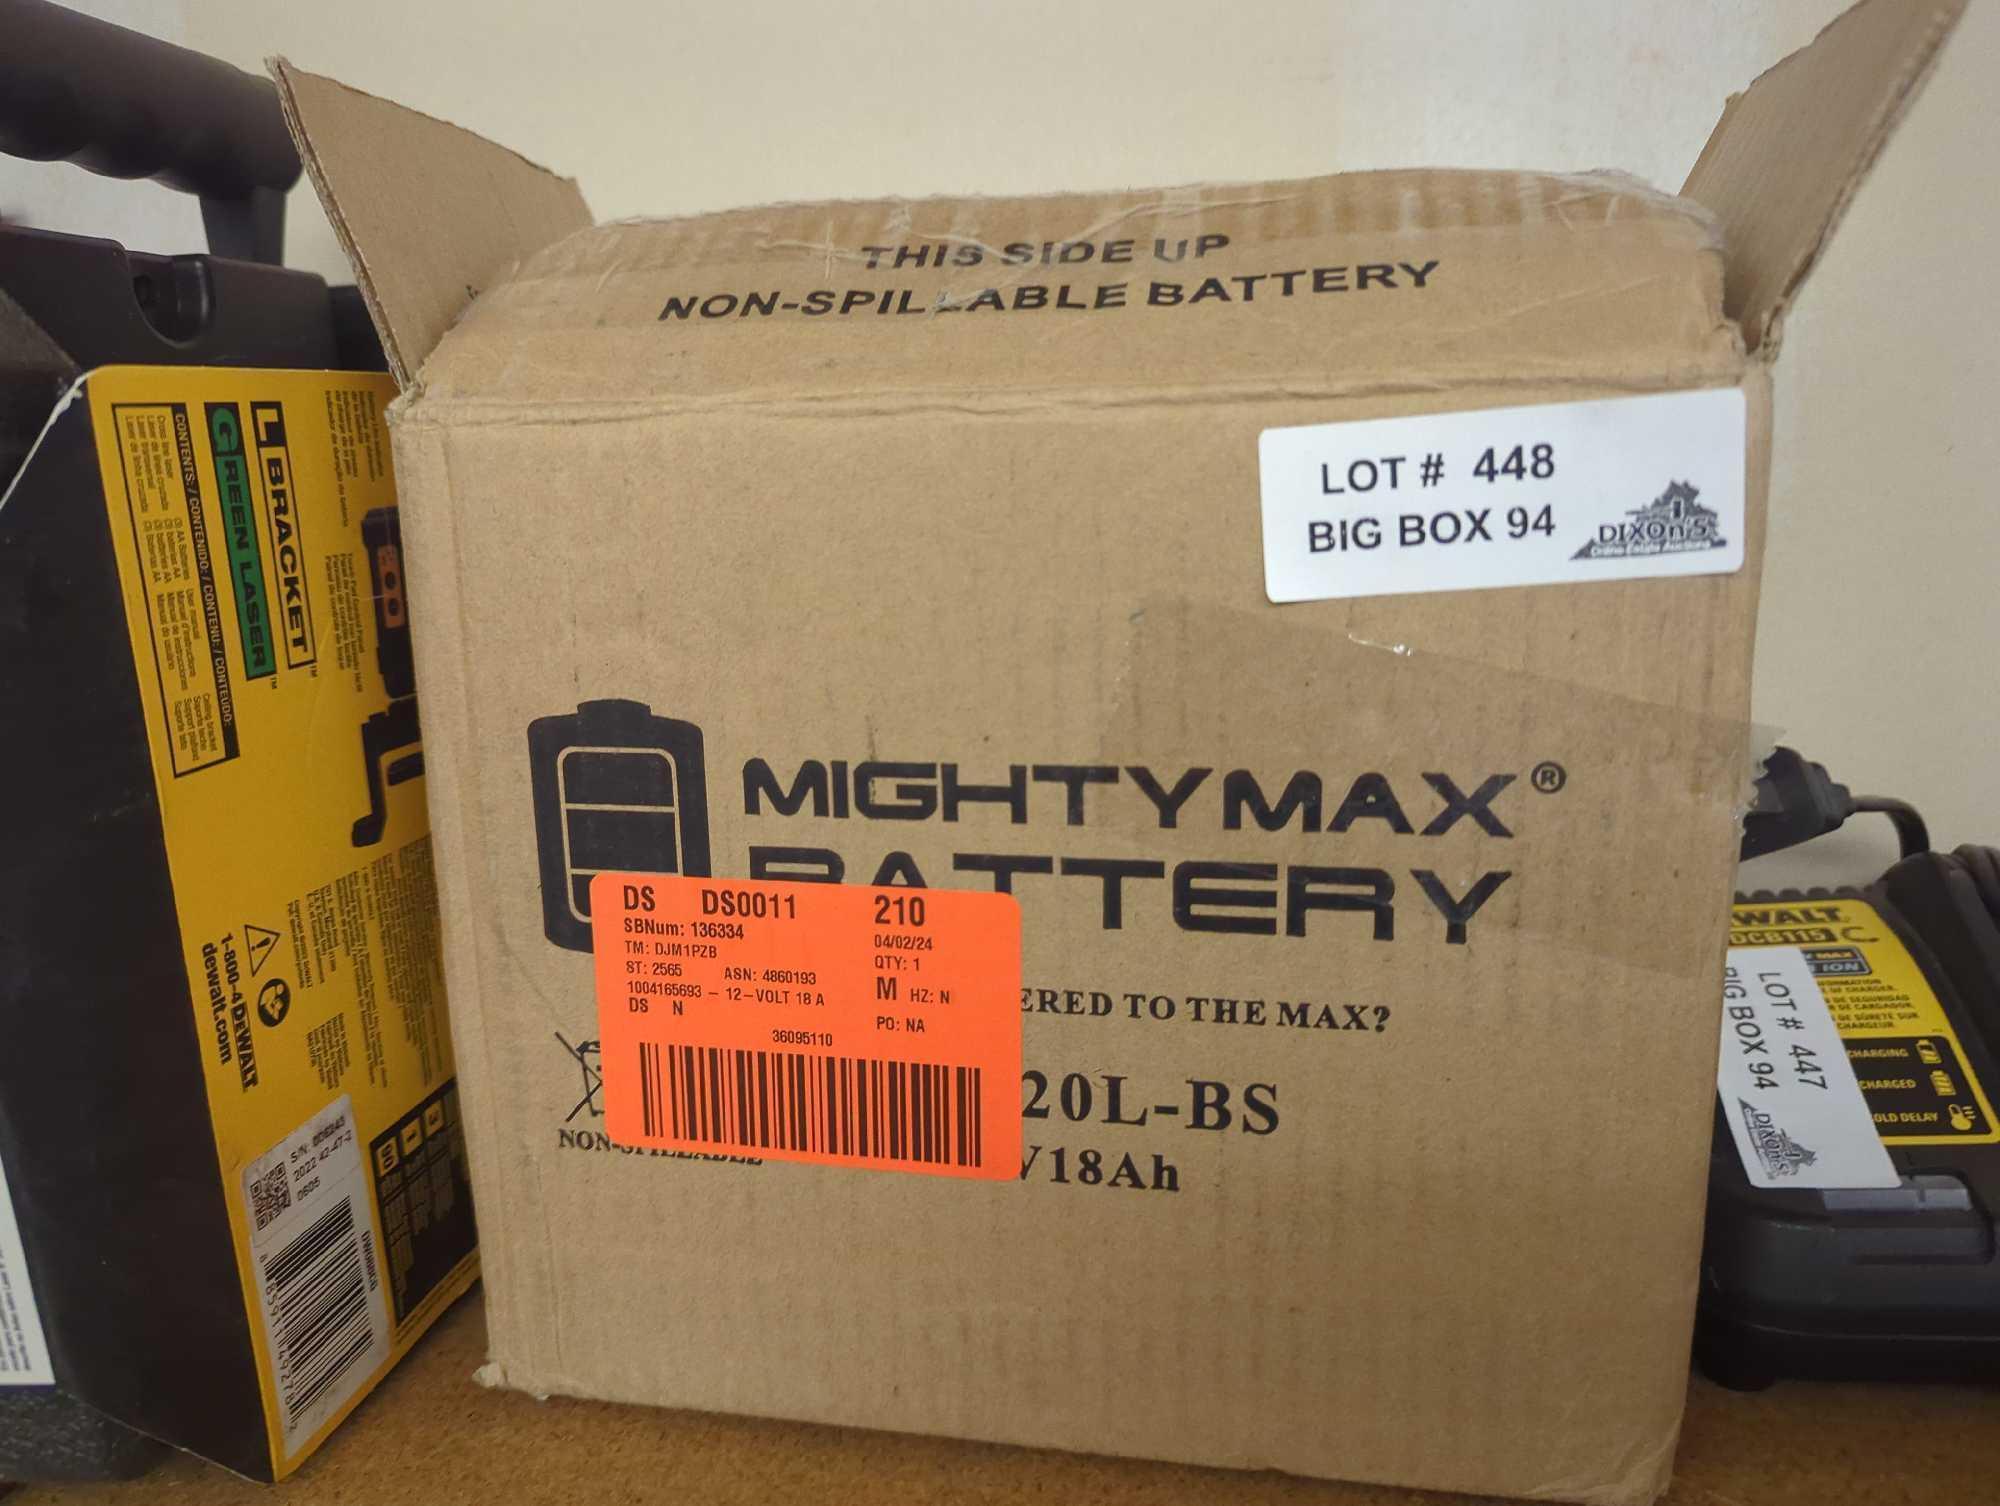 MIGHTY MAX BATTERY 12-Volt 18 Ah 270 CCA Rechargeable Sealed Lead Acid (SLA) Powersport Battery,